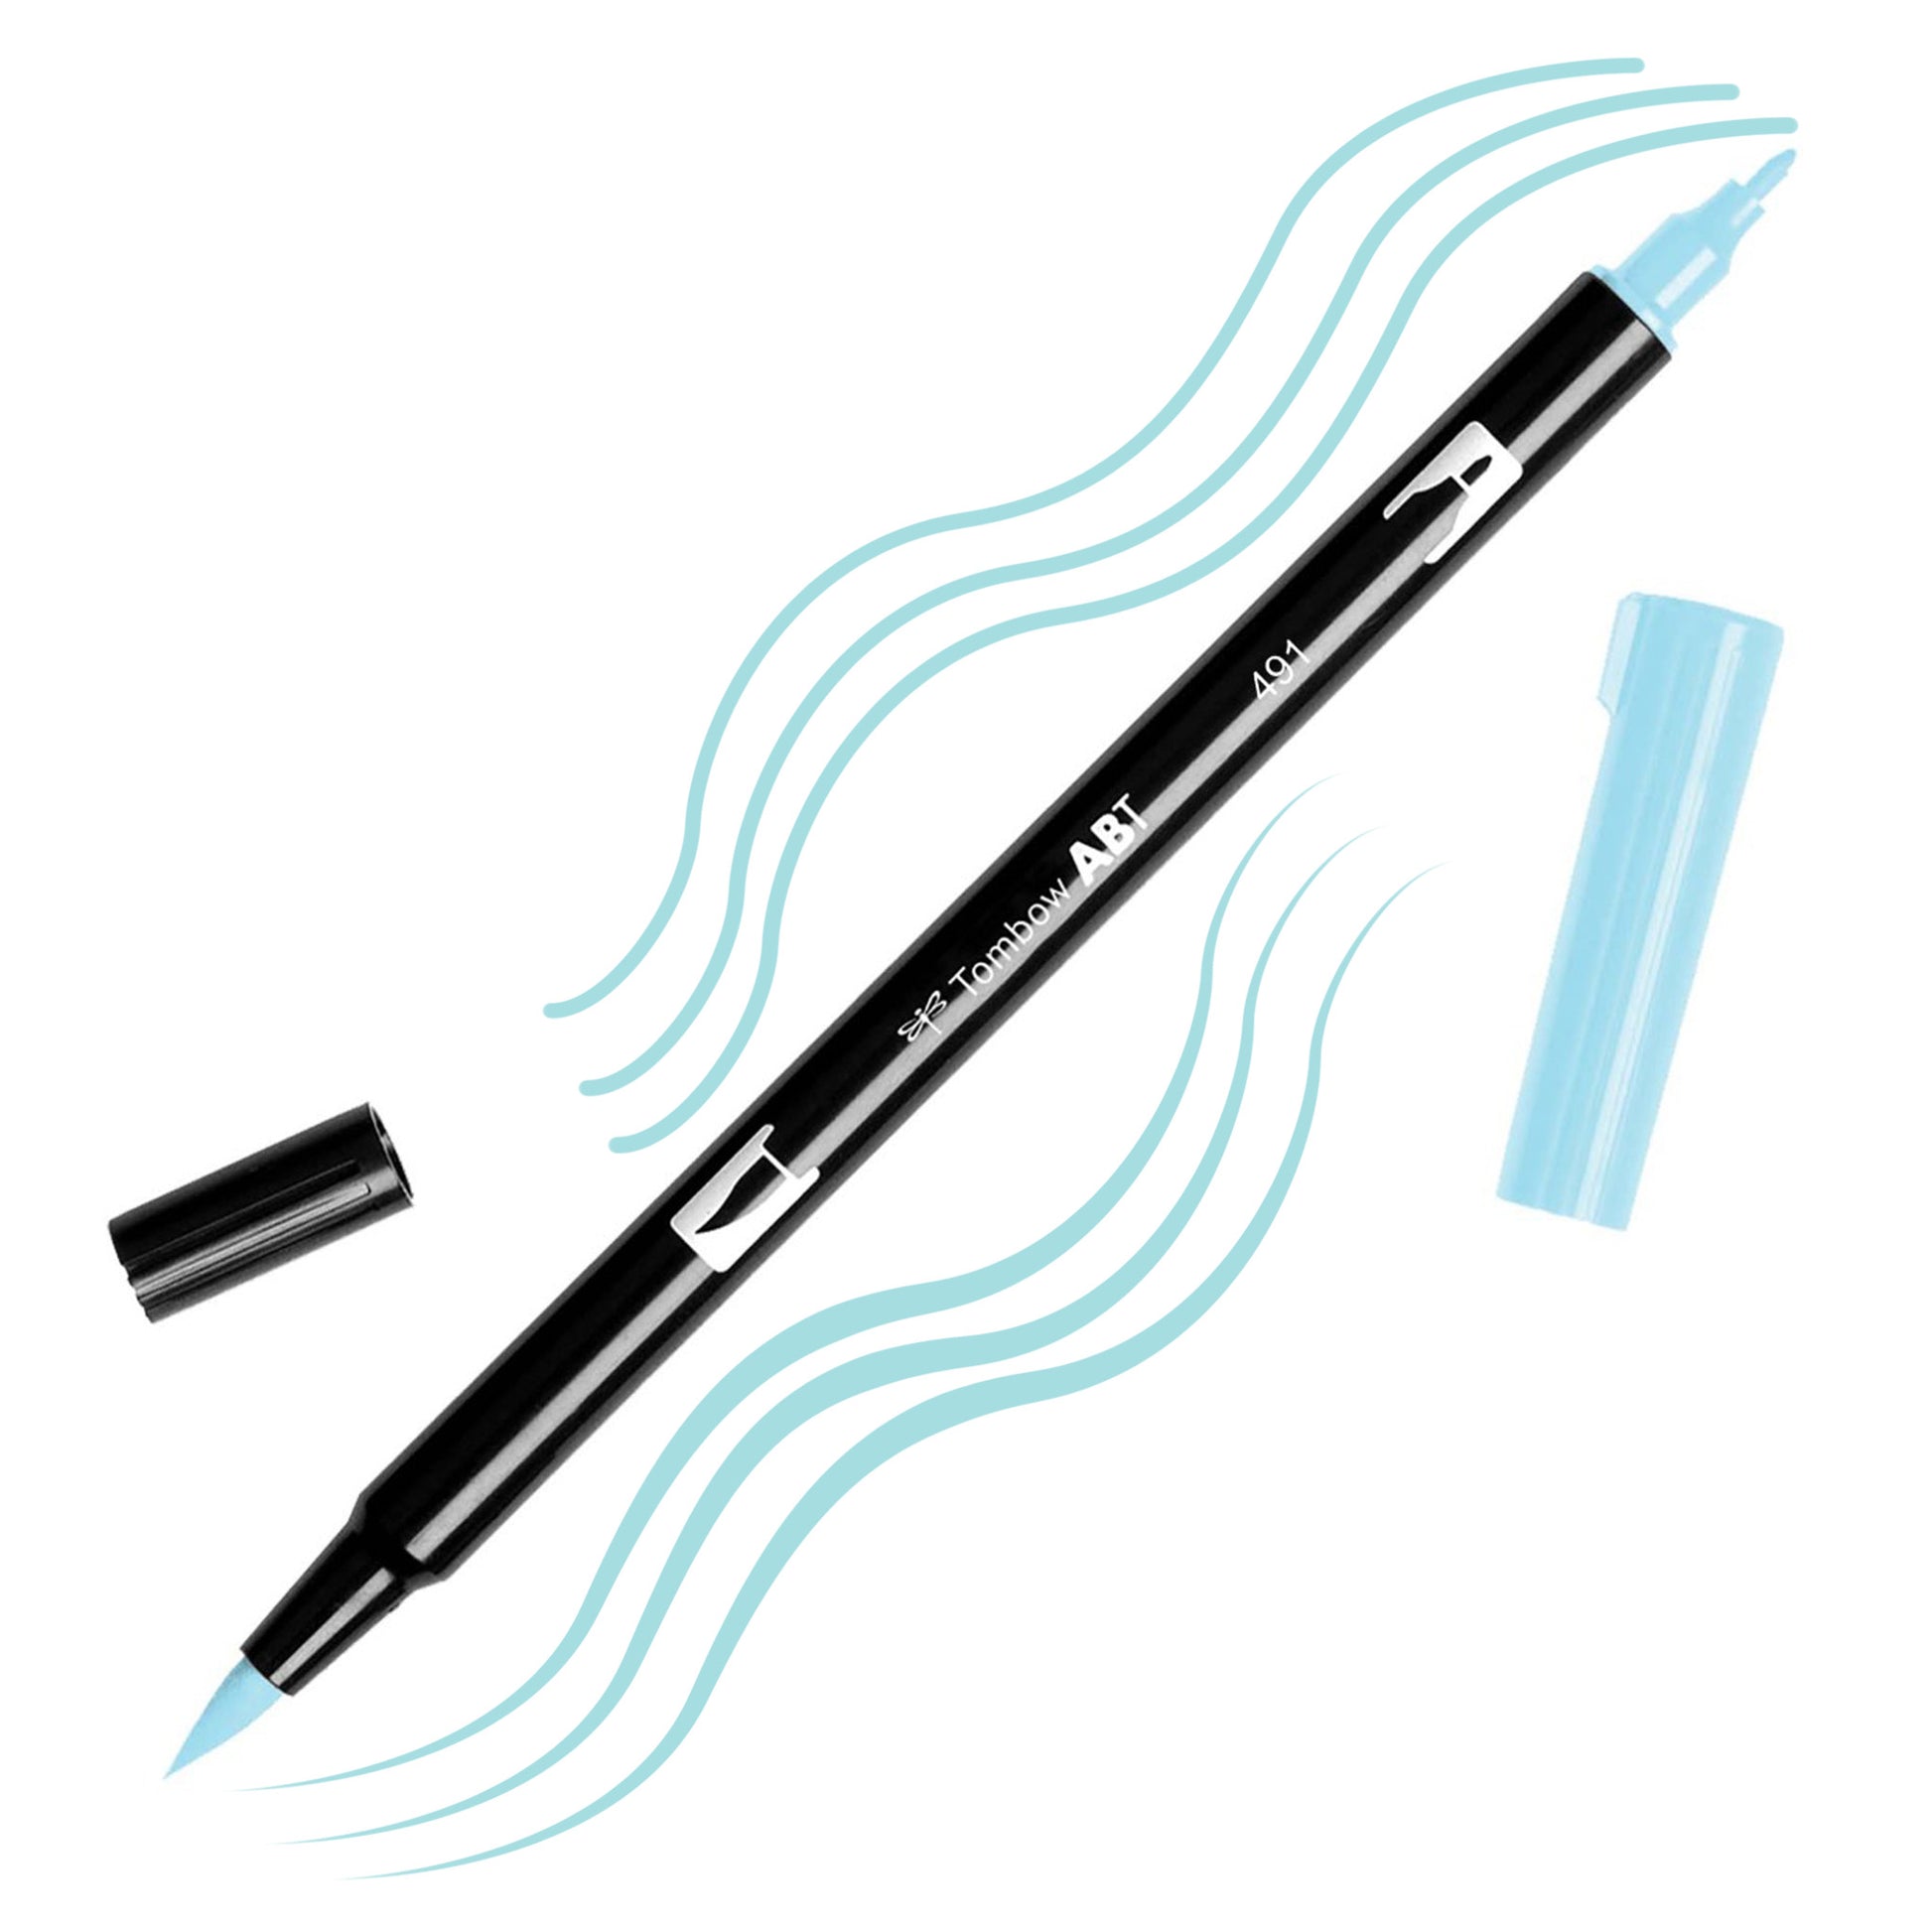 Glacier Blue Tombow double-headed brush-pen with a flexible nylon fiber brush tip and a fine tip against a white background with Glacier Blue strokes